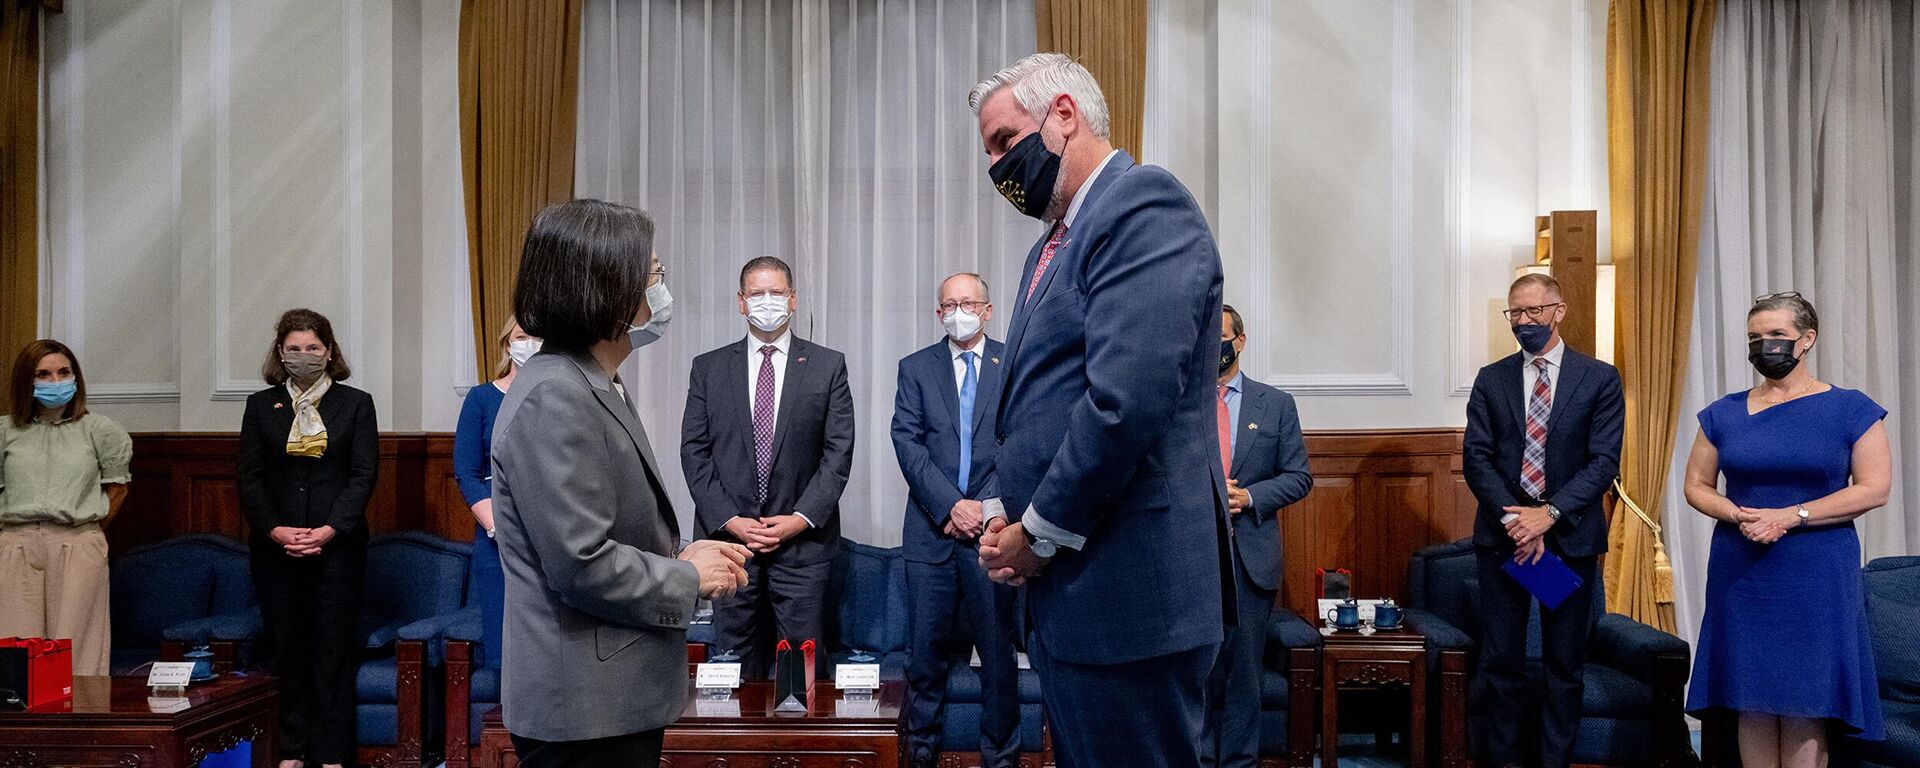 This handout picture taken and released by Taiwan’s Presidential Office on August 22, 2022 shows Taiwan's President Tsai Ing-wen (L) speaking with Eric Holcomb (R), the Republican governor of the US state of Indiana, during a meeting at the Presidential Office in Taipei.  - Sputnik International, 1920, 22.08.2022